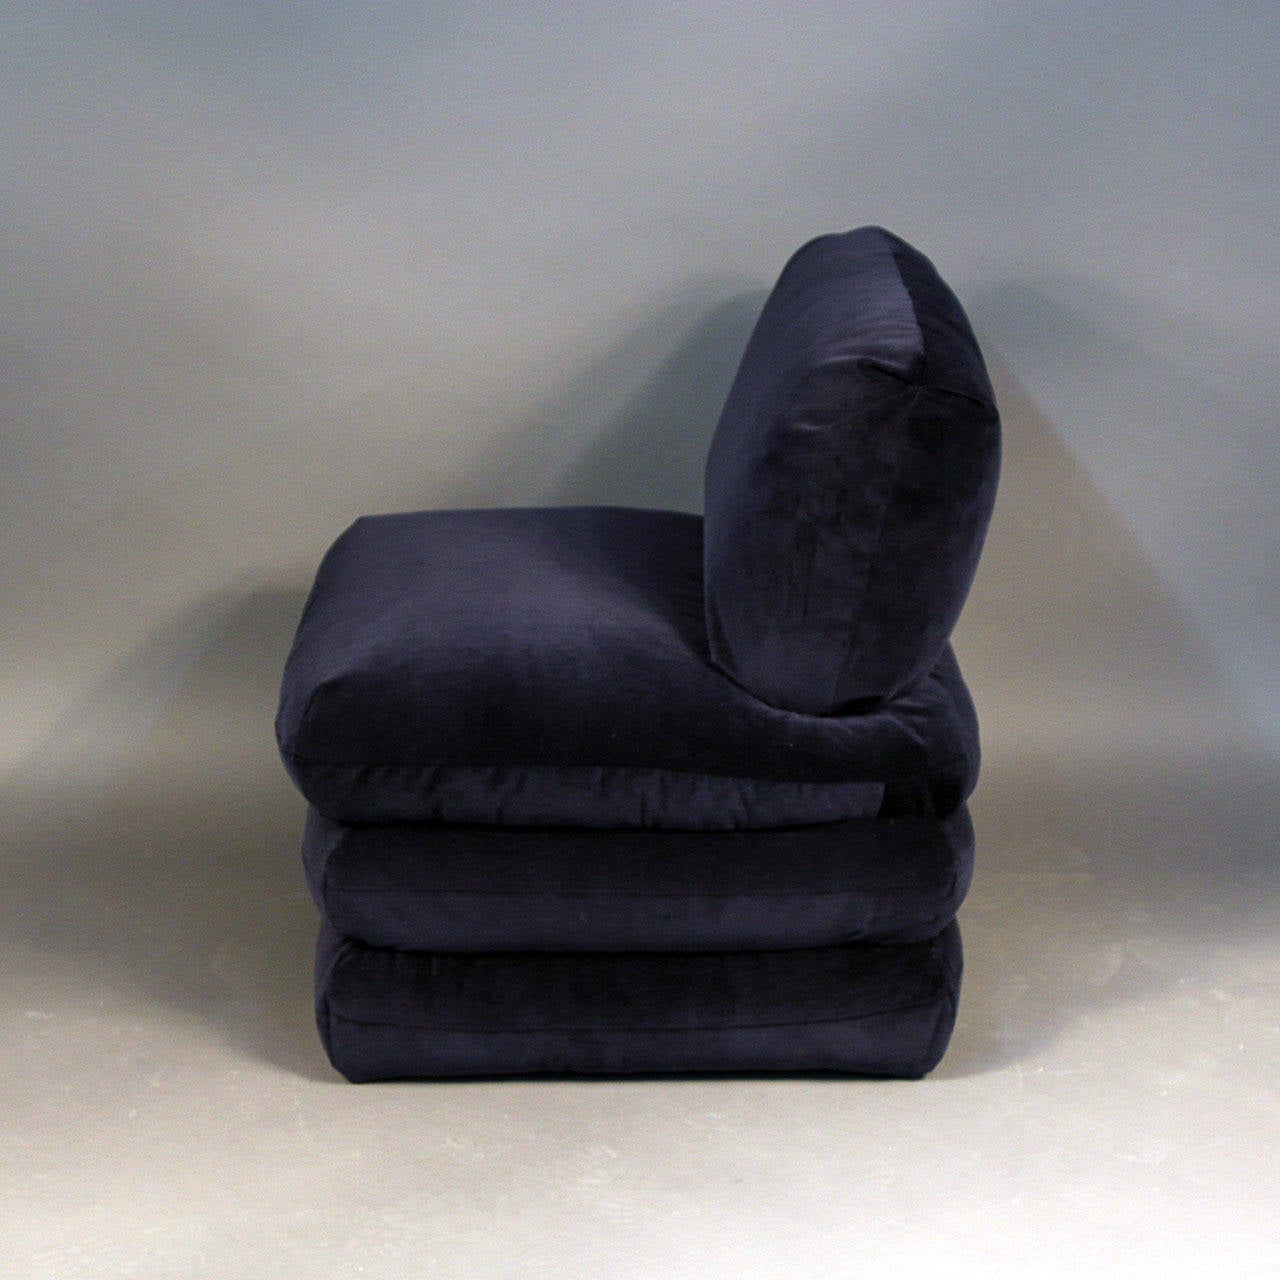 American Vice Versa for Donghia Pair of Slipper Chairs For Sale